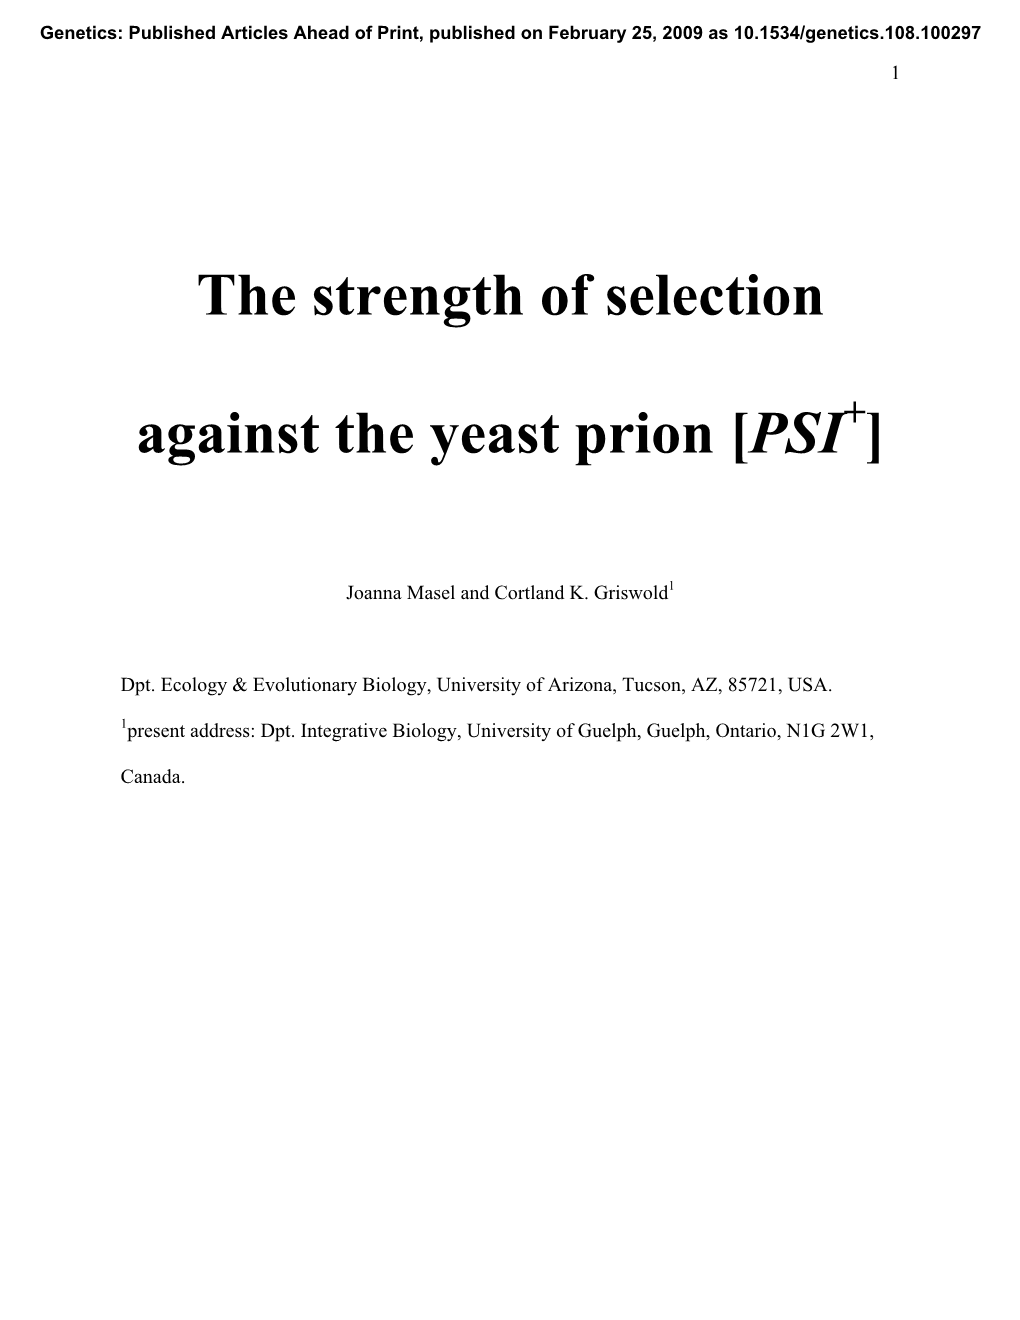 The Strength of Selection Against the Yeast Prion [PSI ]